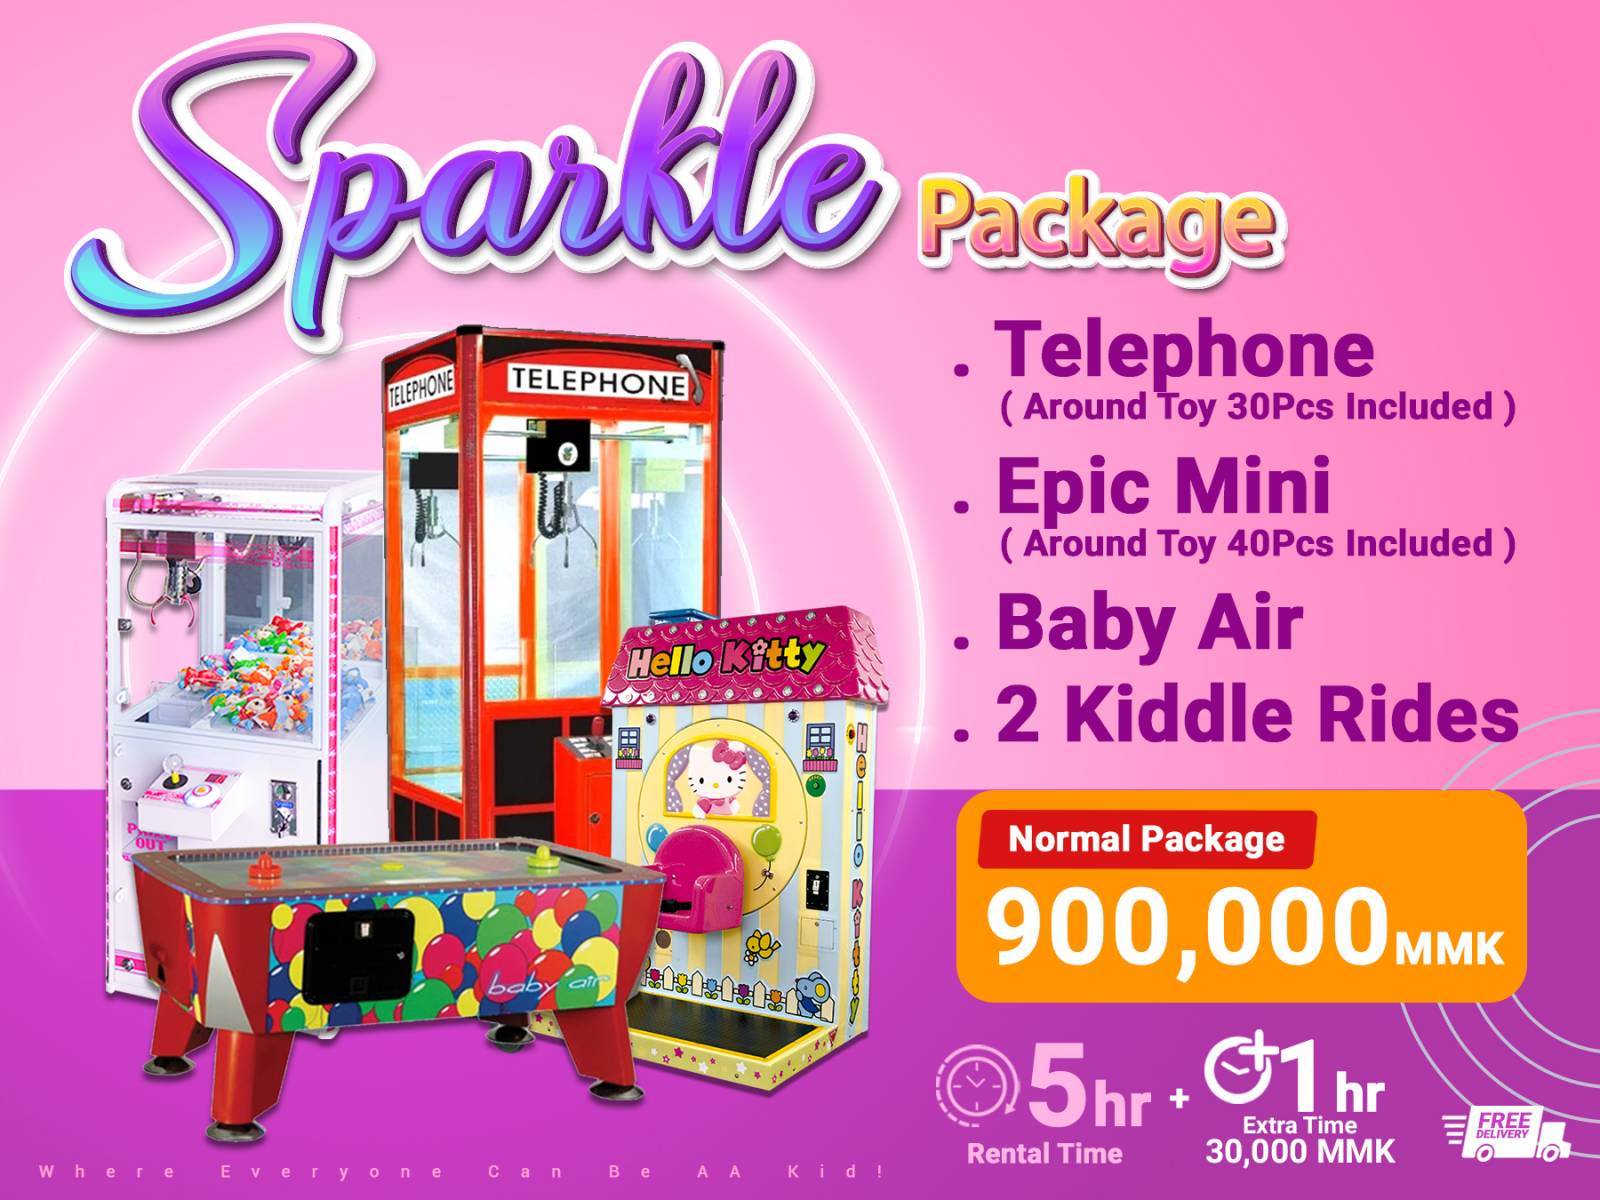 Sparkle Package (Normal)